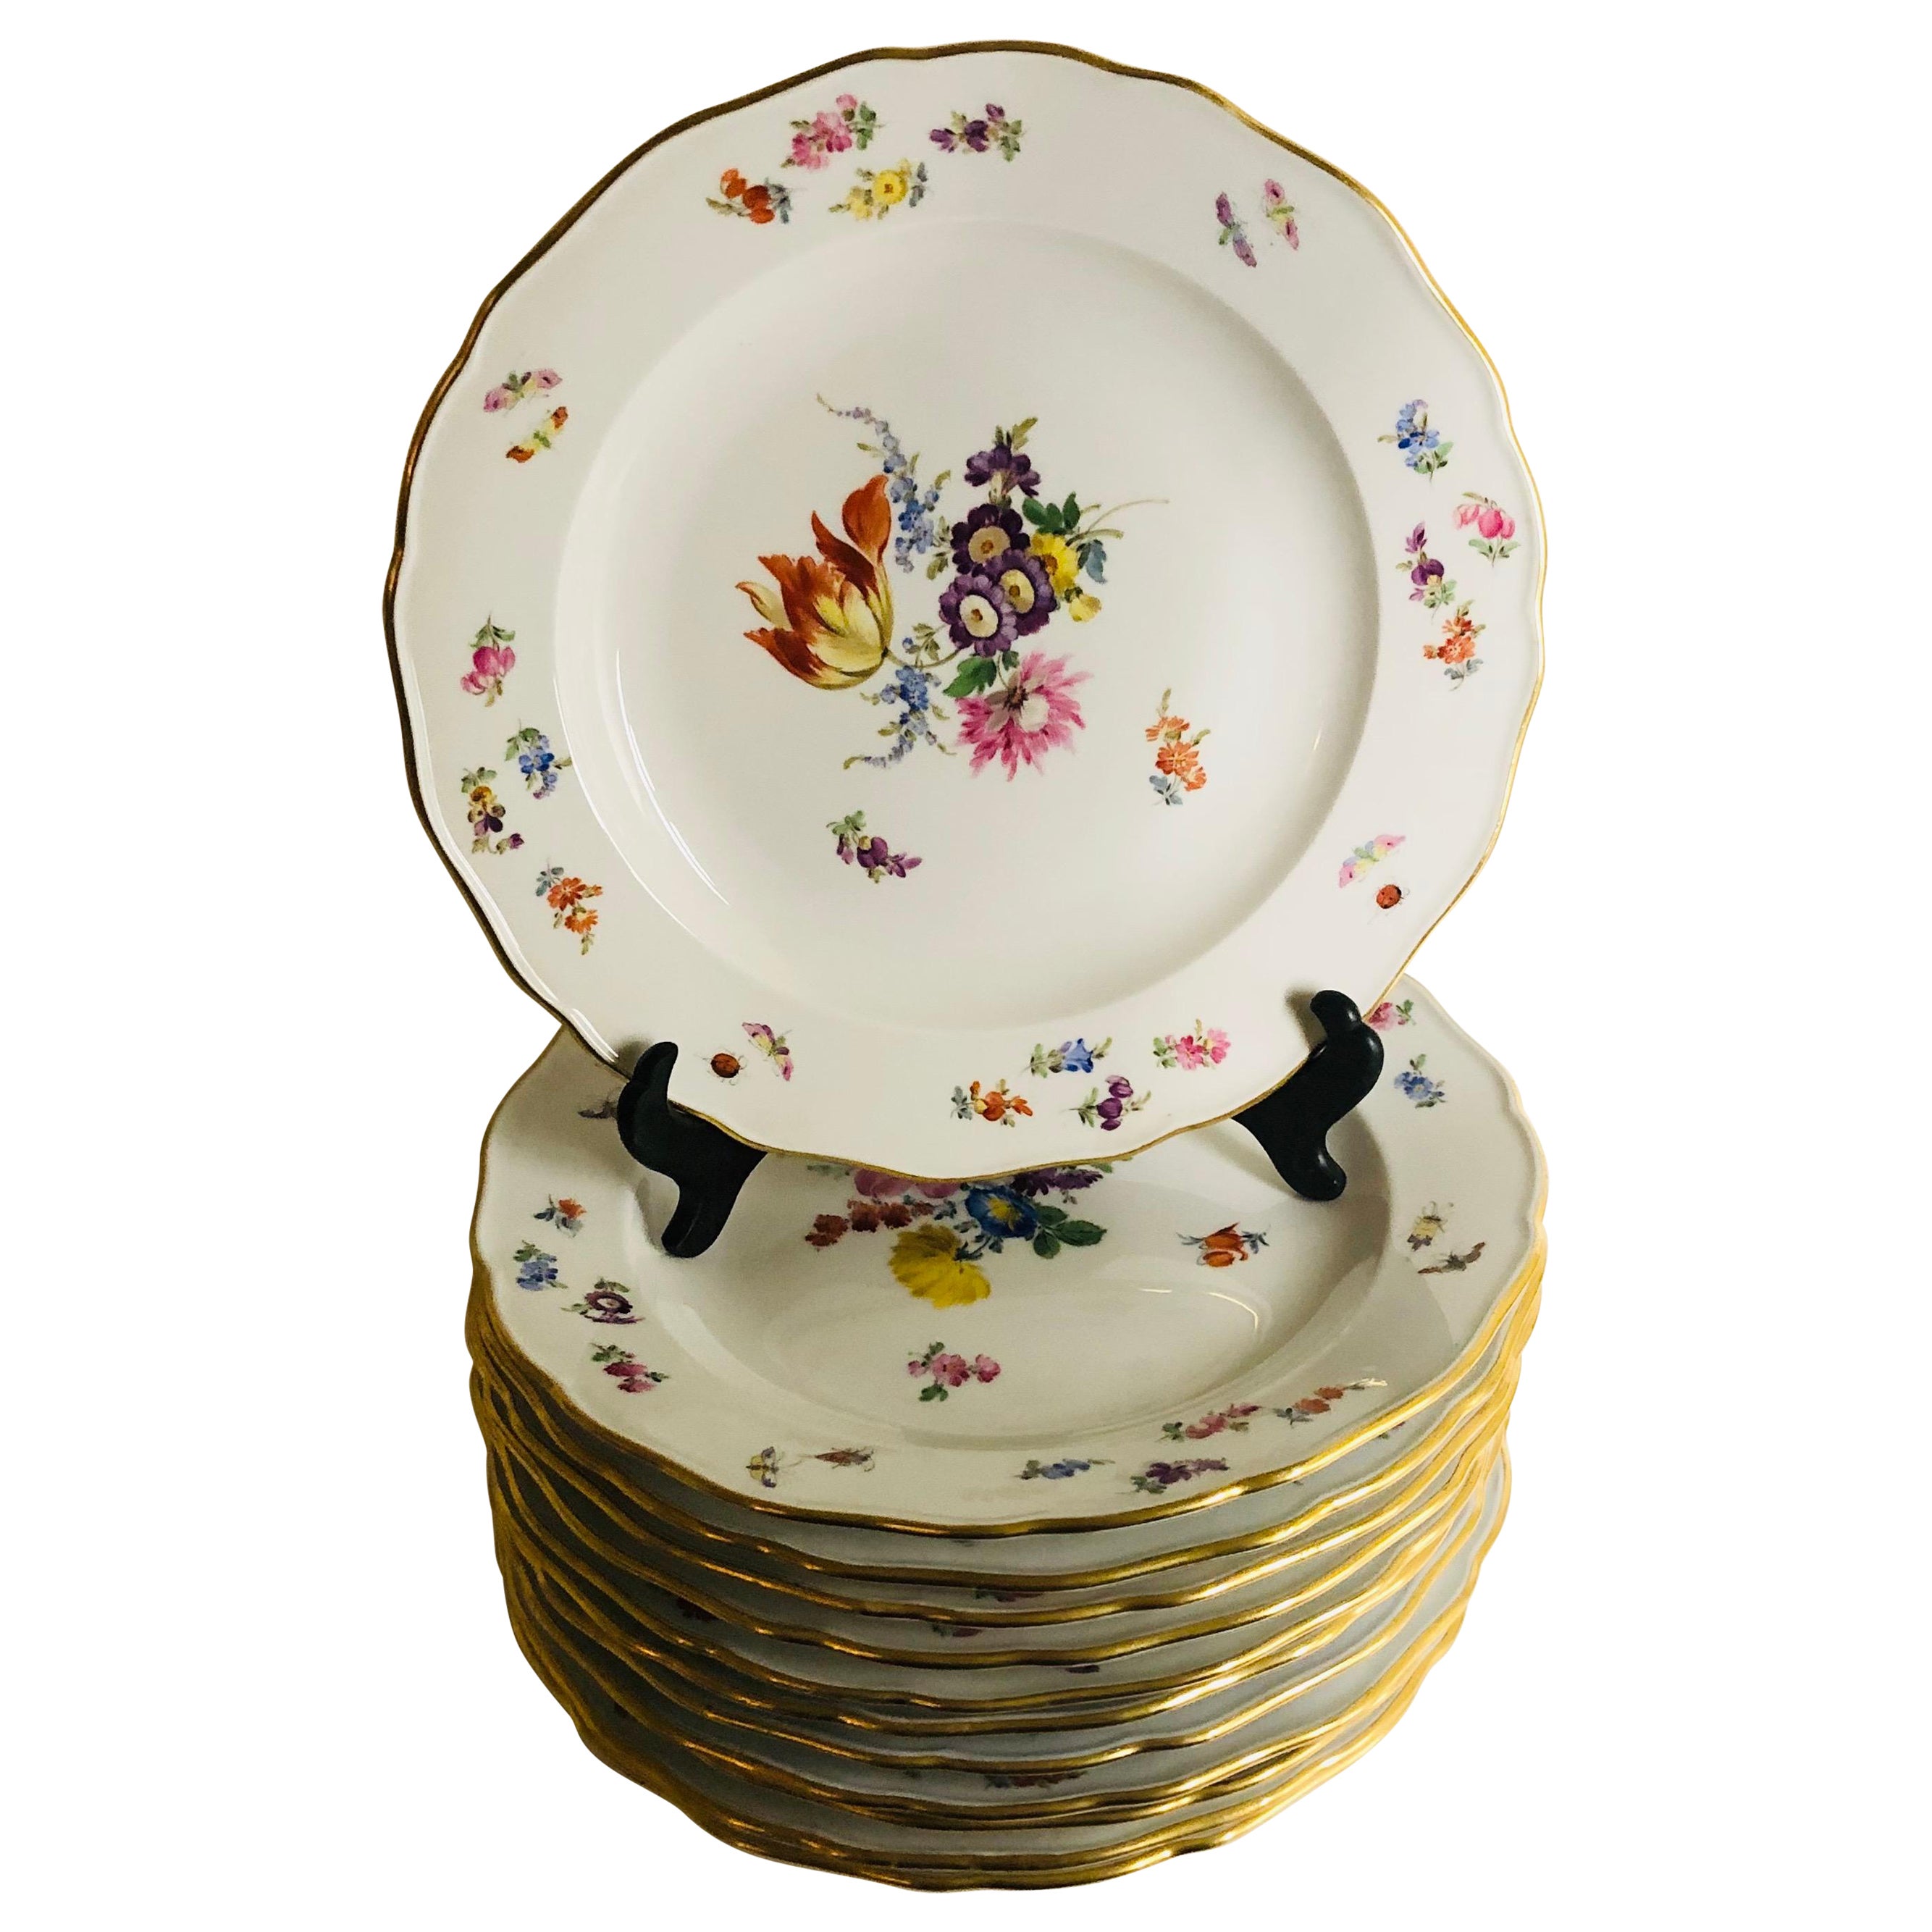 Set of 12 Meissen Dinner Plates Each Painted with a Different Bouquet of Flowers